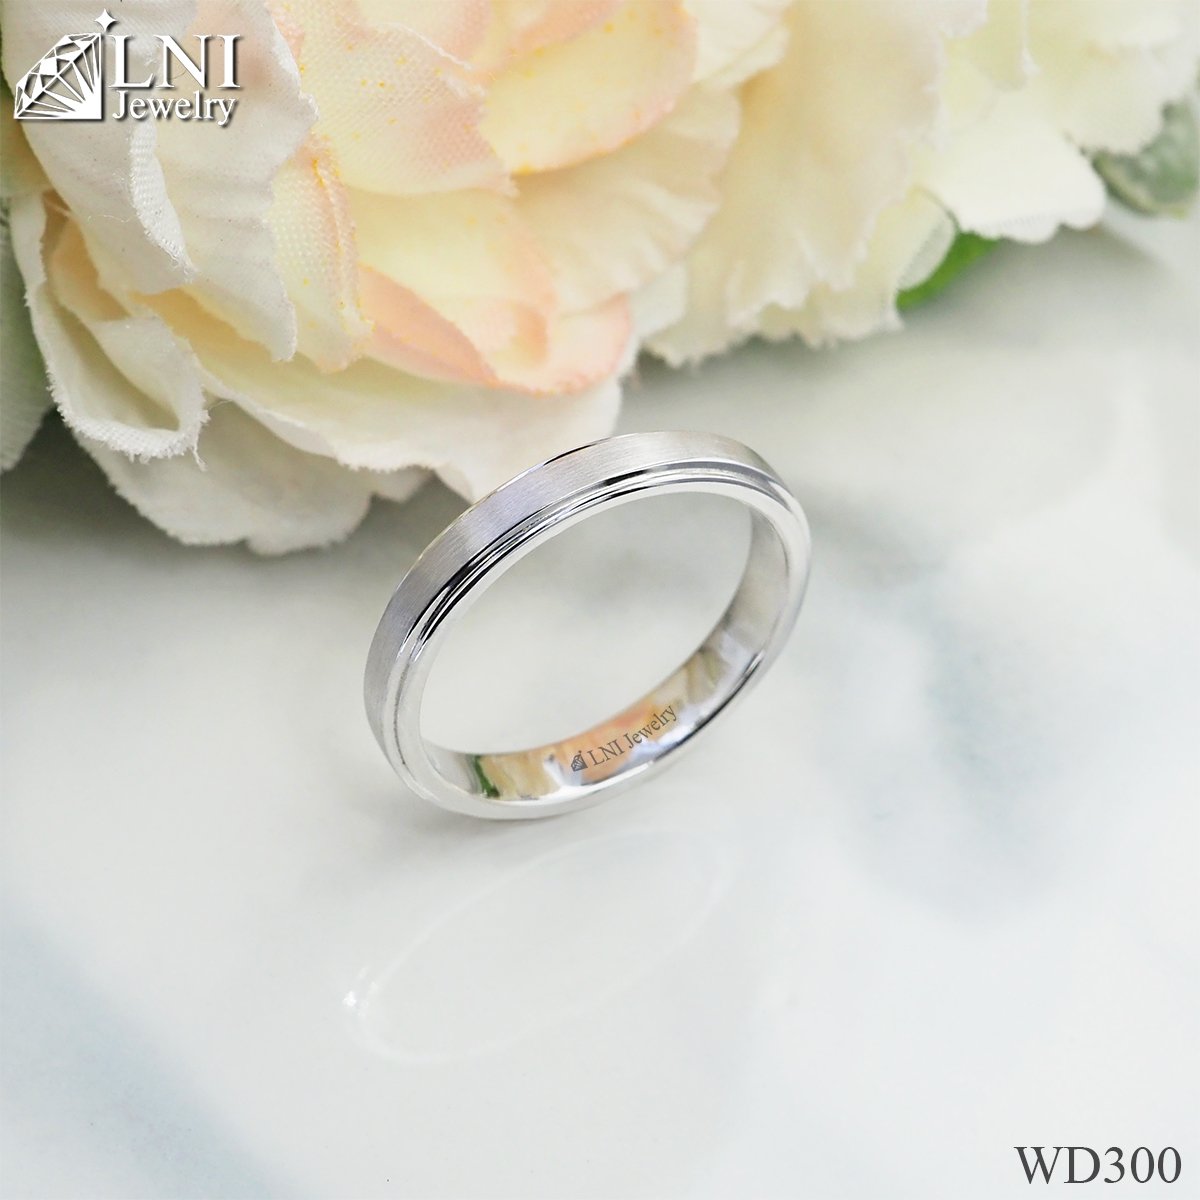 WD300 Smooth Ring